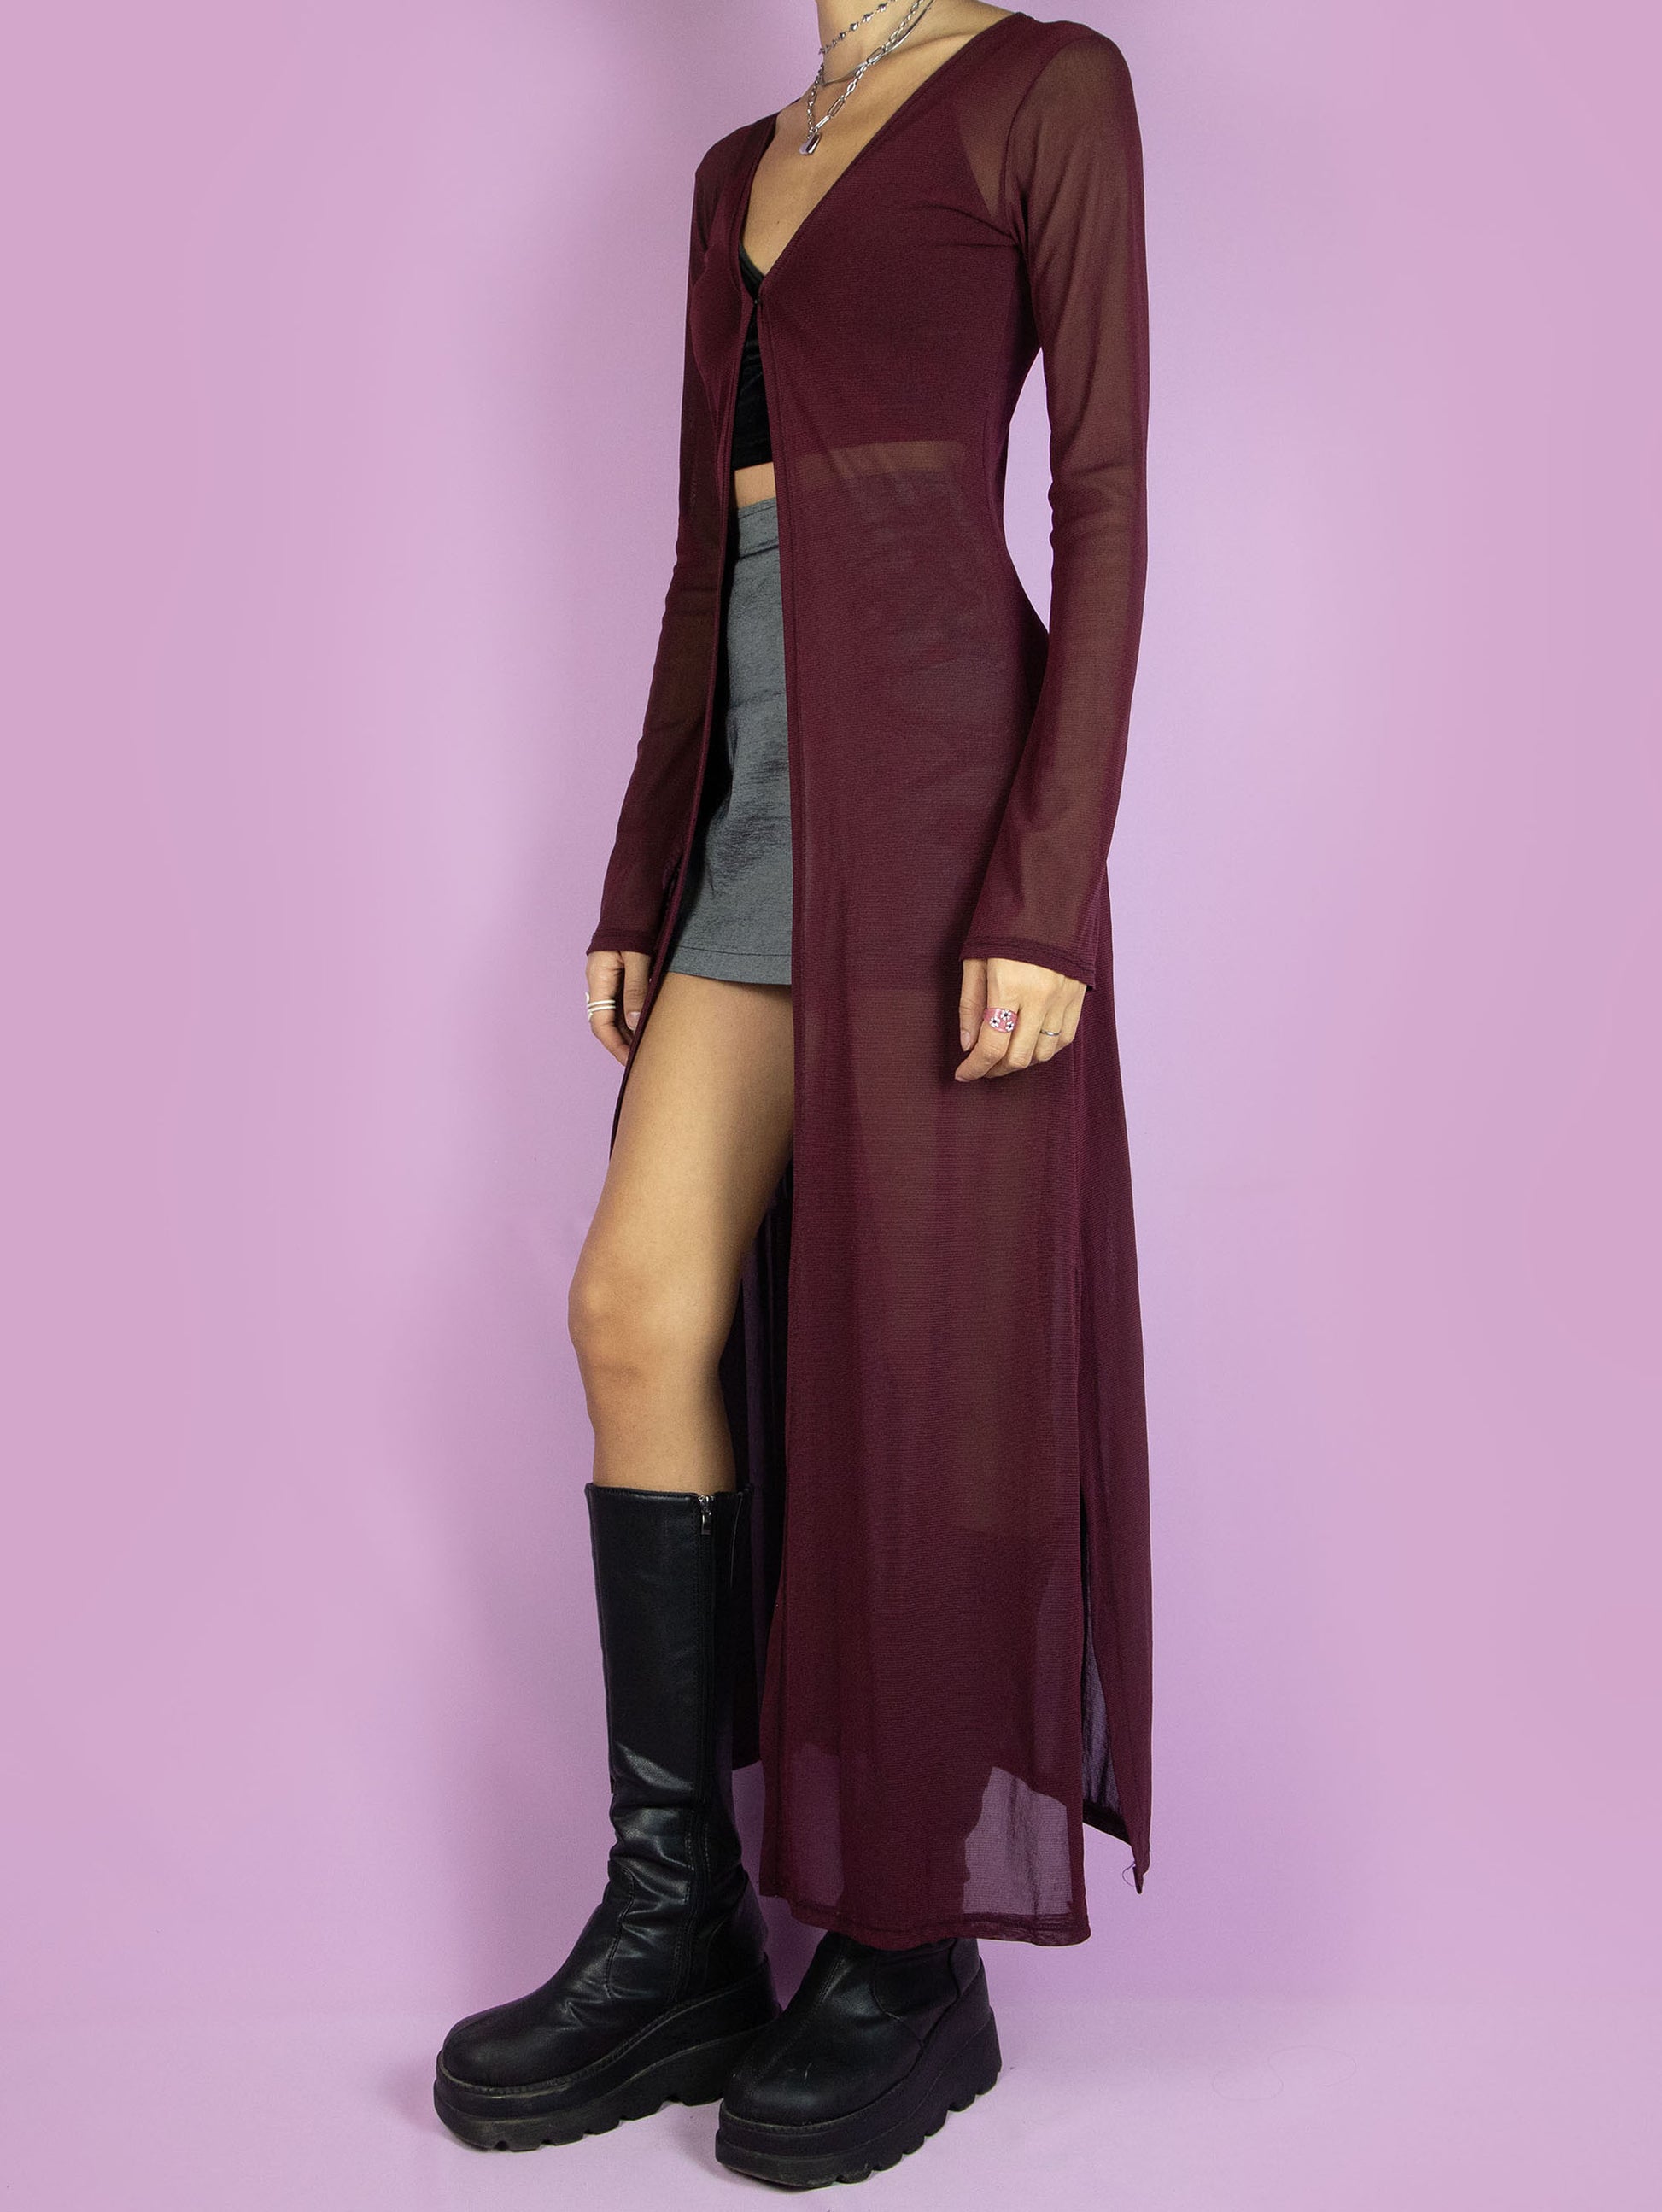 The Y2K Maroon Mesh Duster Jacket is a vintage burgundy semi-sheer mesh maxi long duster jacket with bell sleeves and a front hook closure. Cyber goth 2000s festival rave party coat.